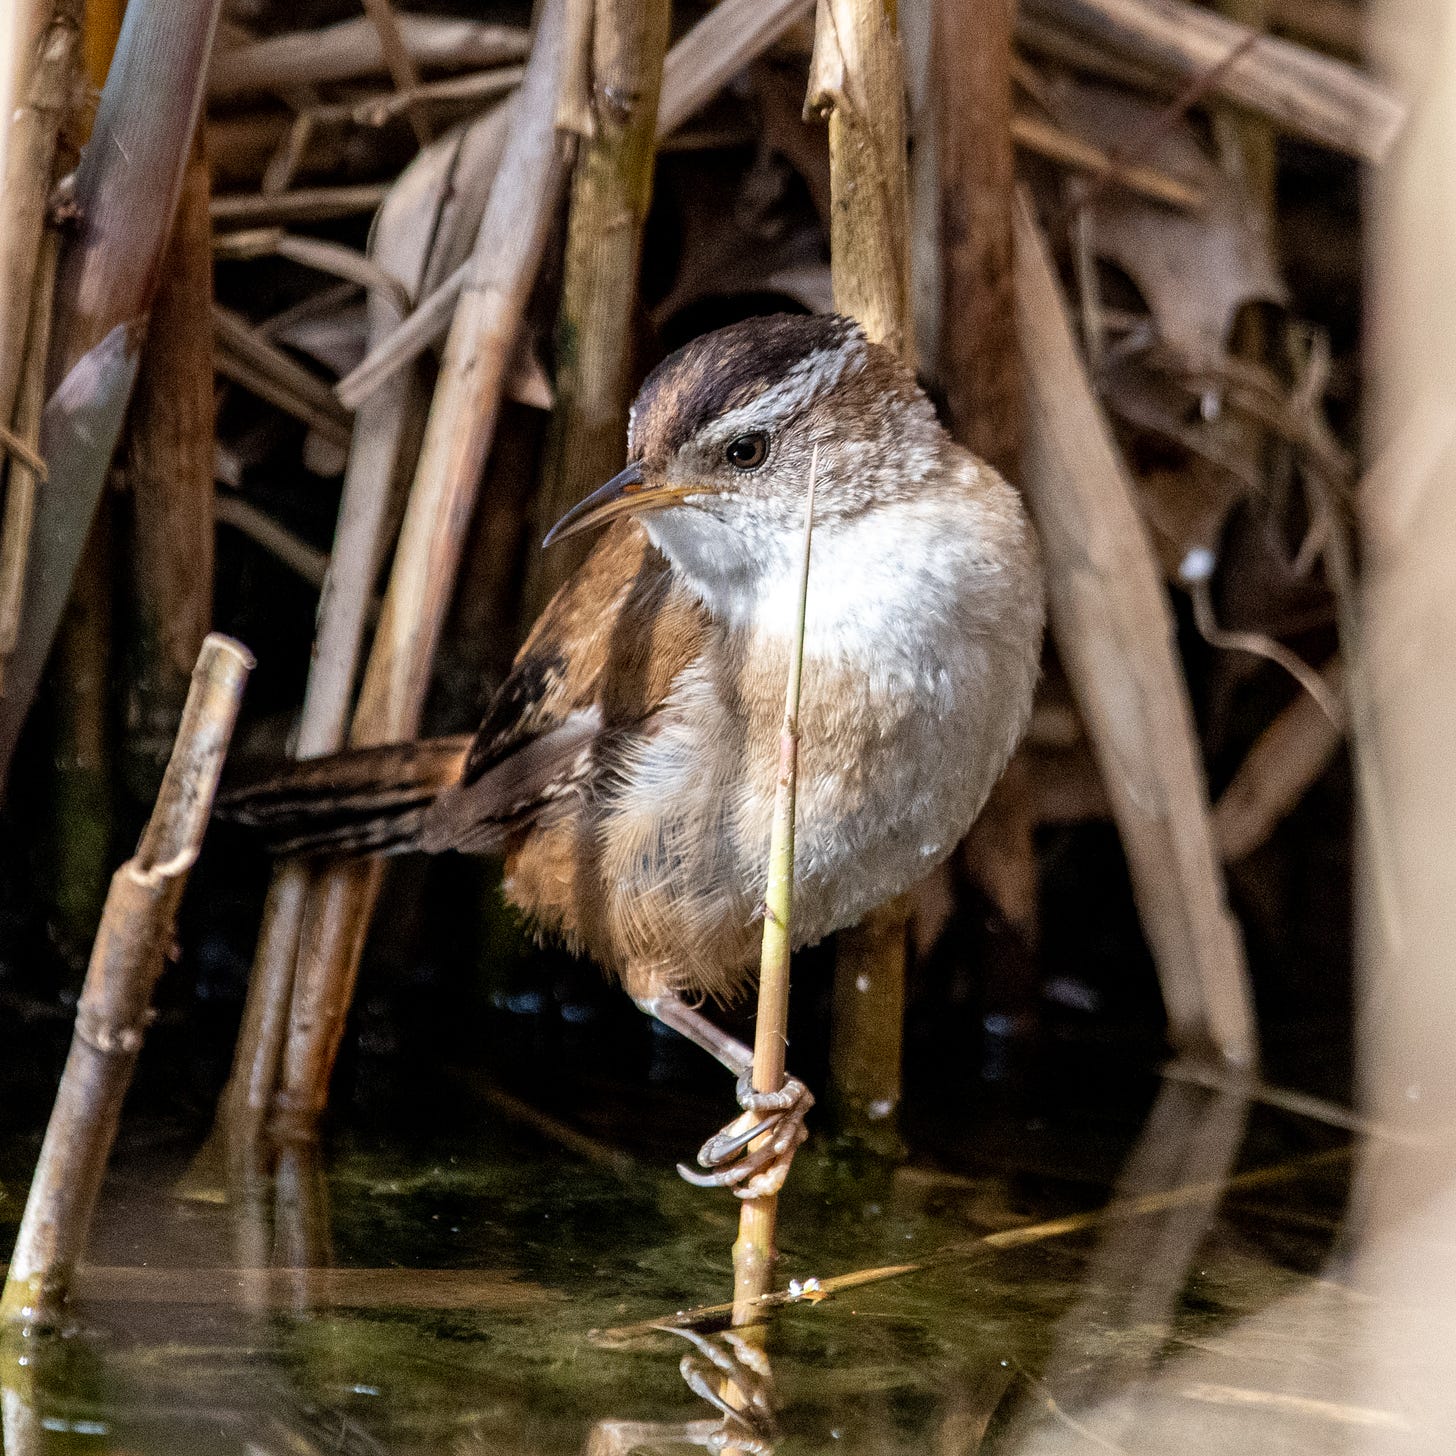 A marsh wren, grasping a reed, looks melancholically over its shoulder